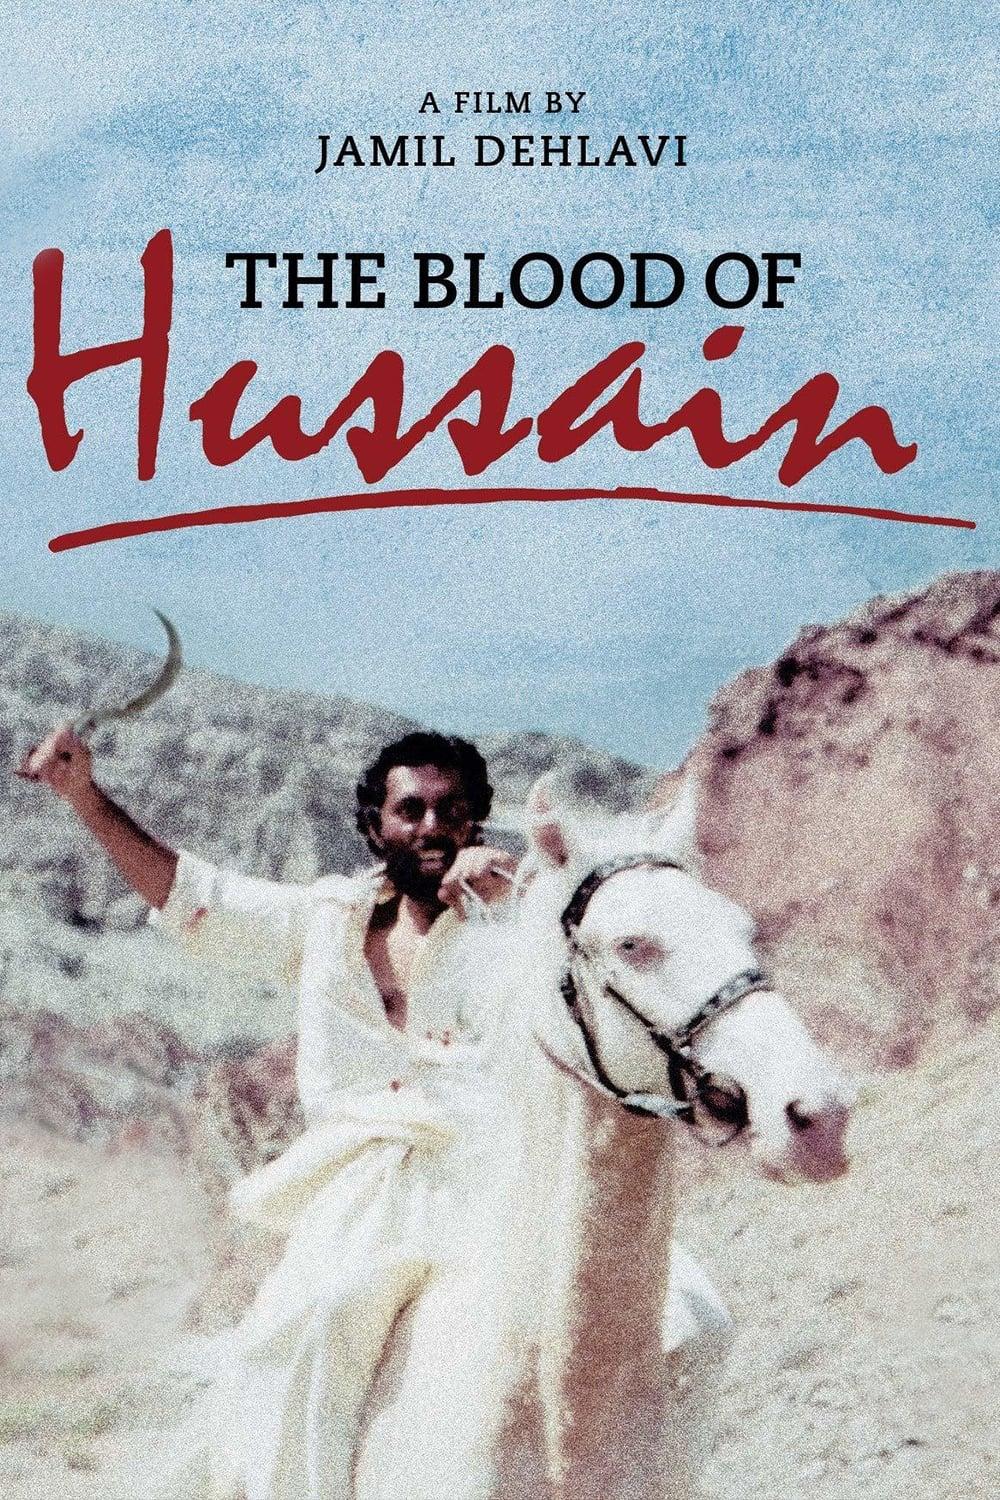 The Blood of Hussain poster